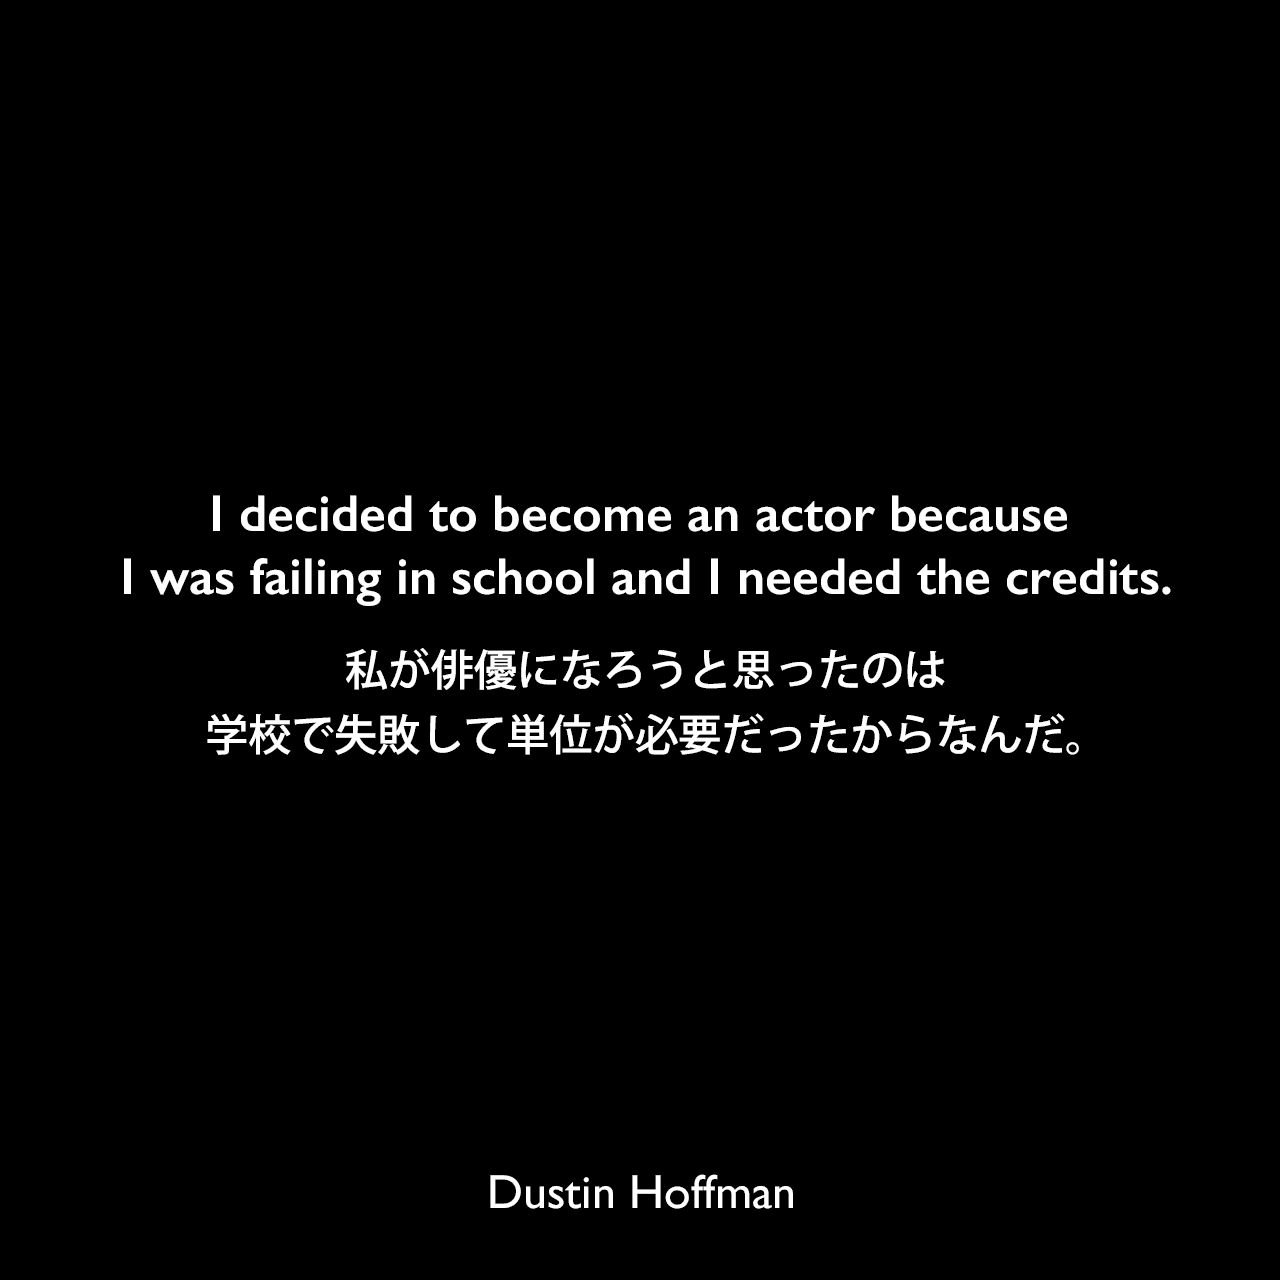 I decided to become an actor because I was failing in school and I needed the credits.私が俳優になろうと思ったのは、学校で失敗して単位が必要だったからなんだ。Dustin Hoffman